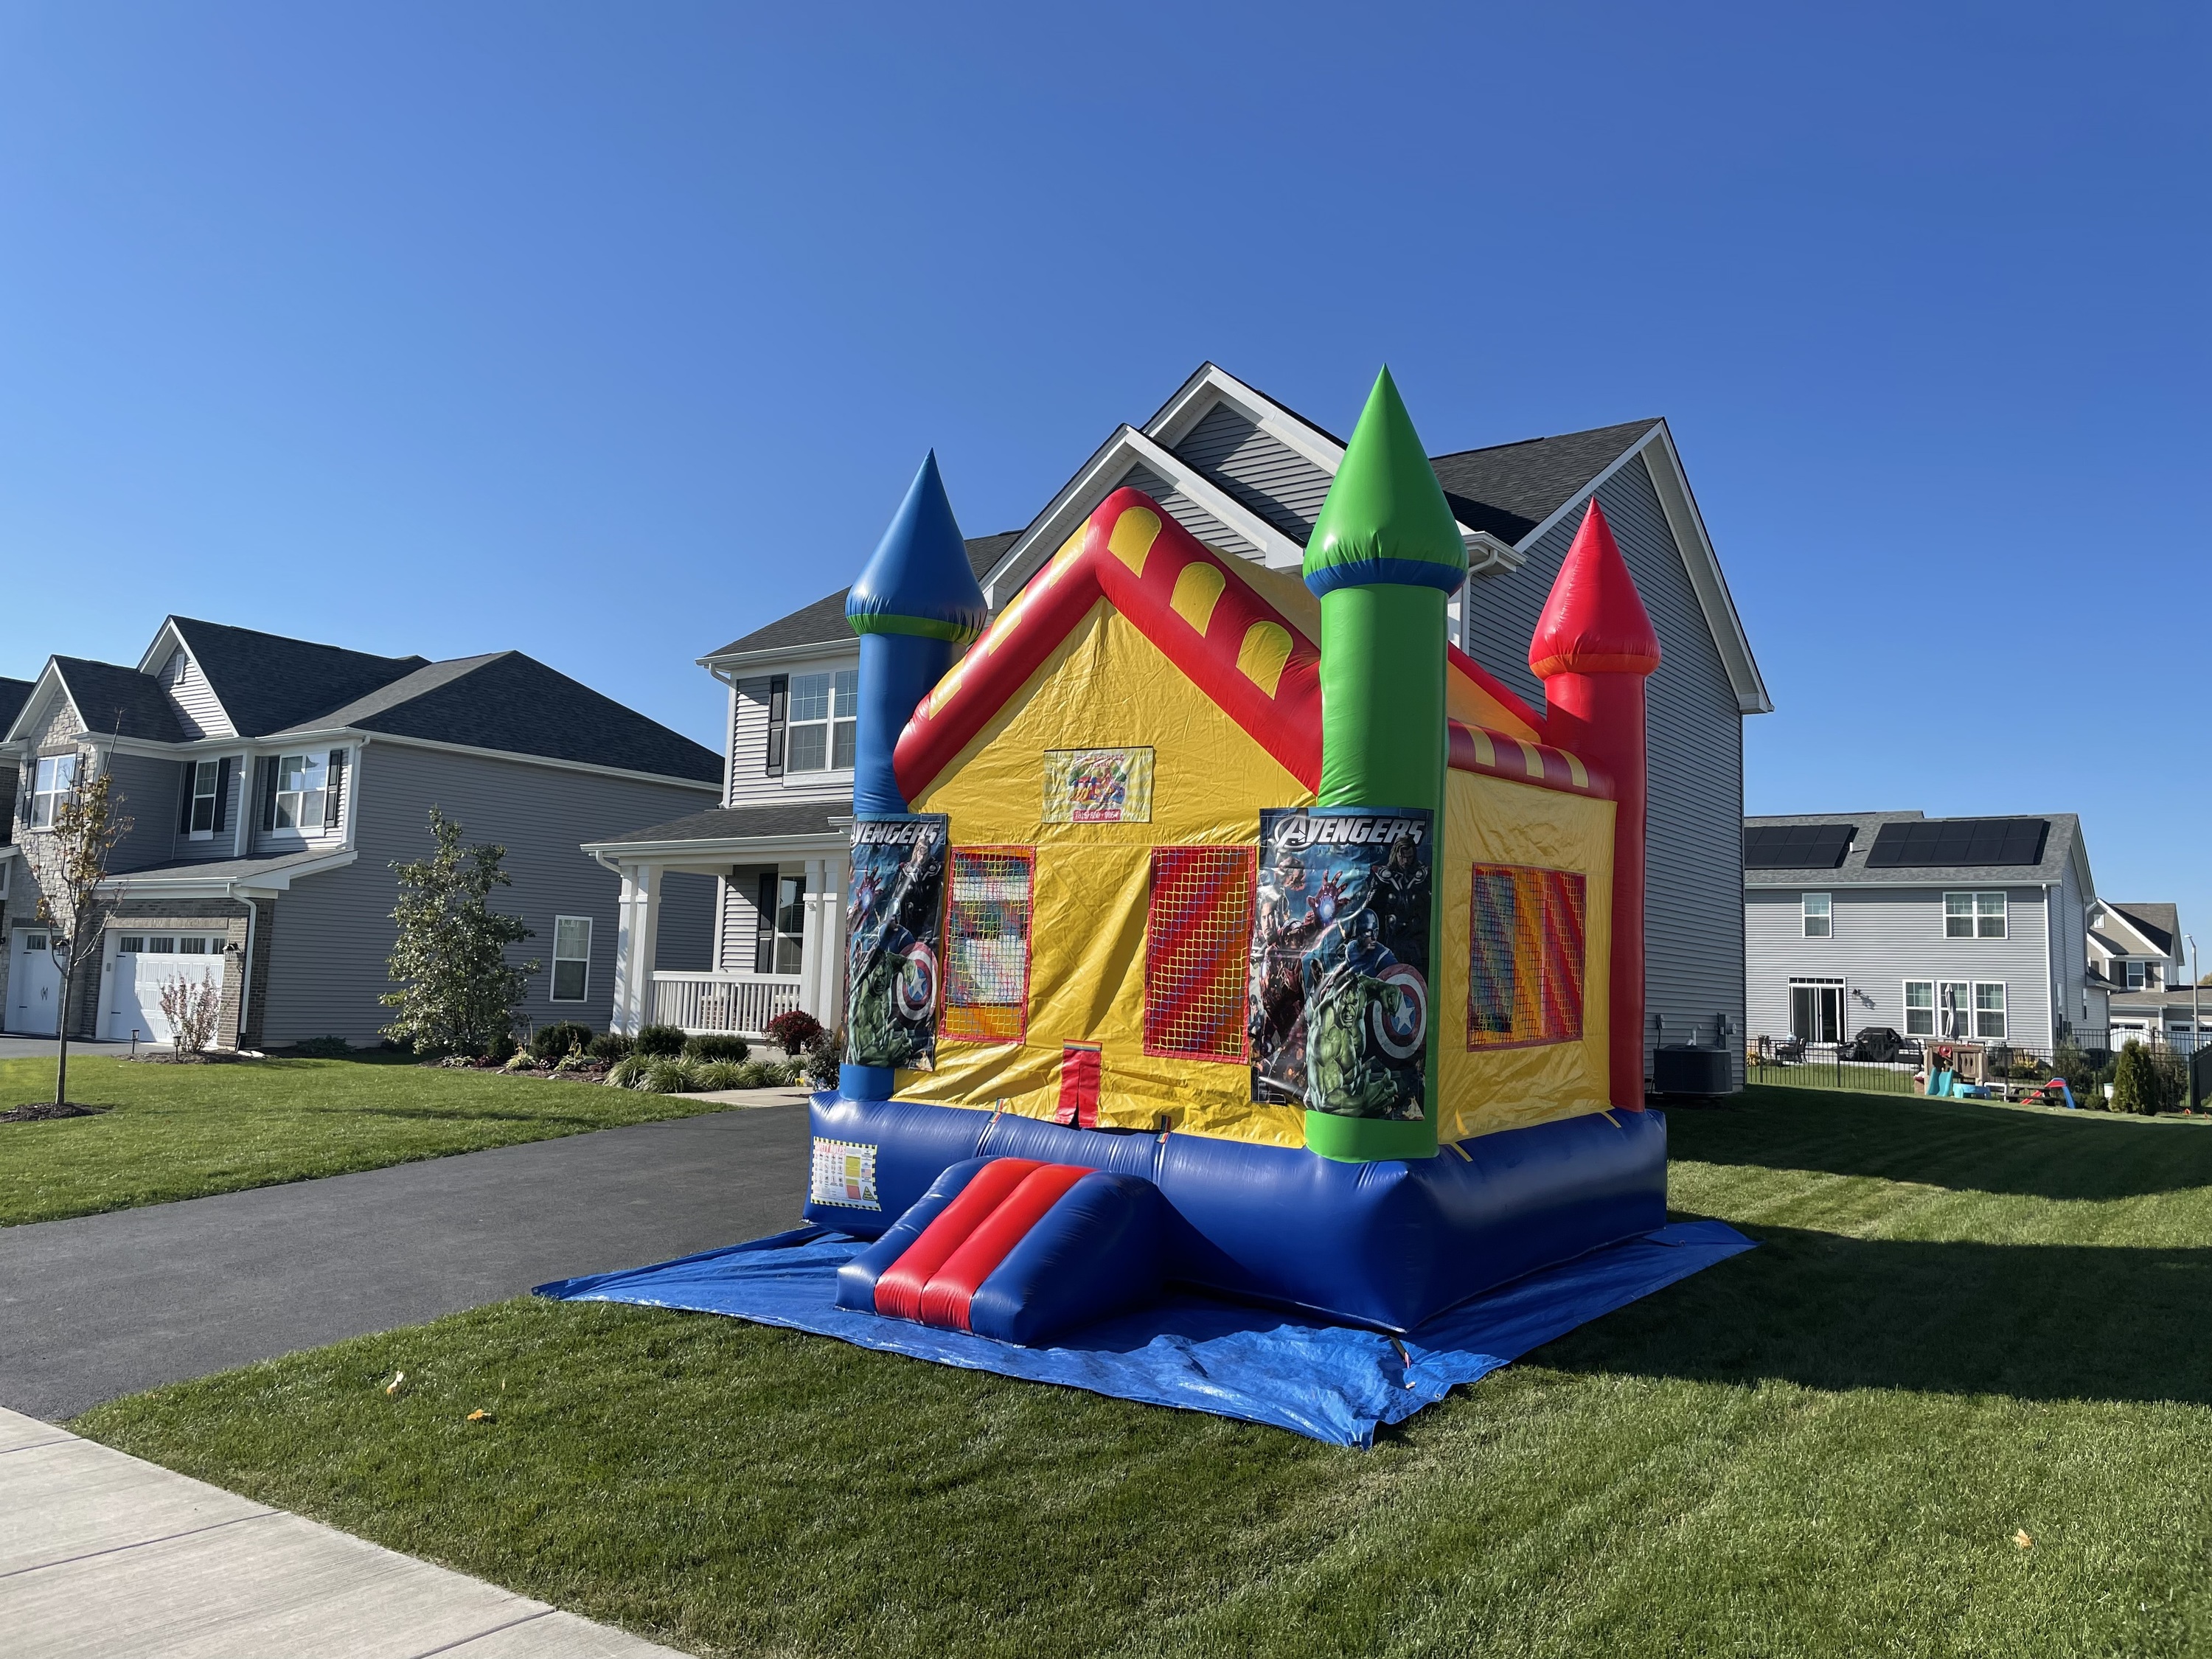 Avengers Bouncey House Rentals, Crest Hill, IL 